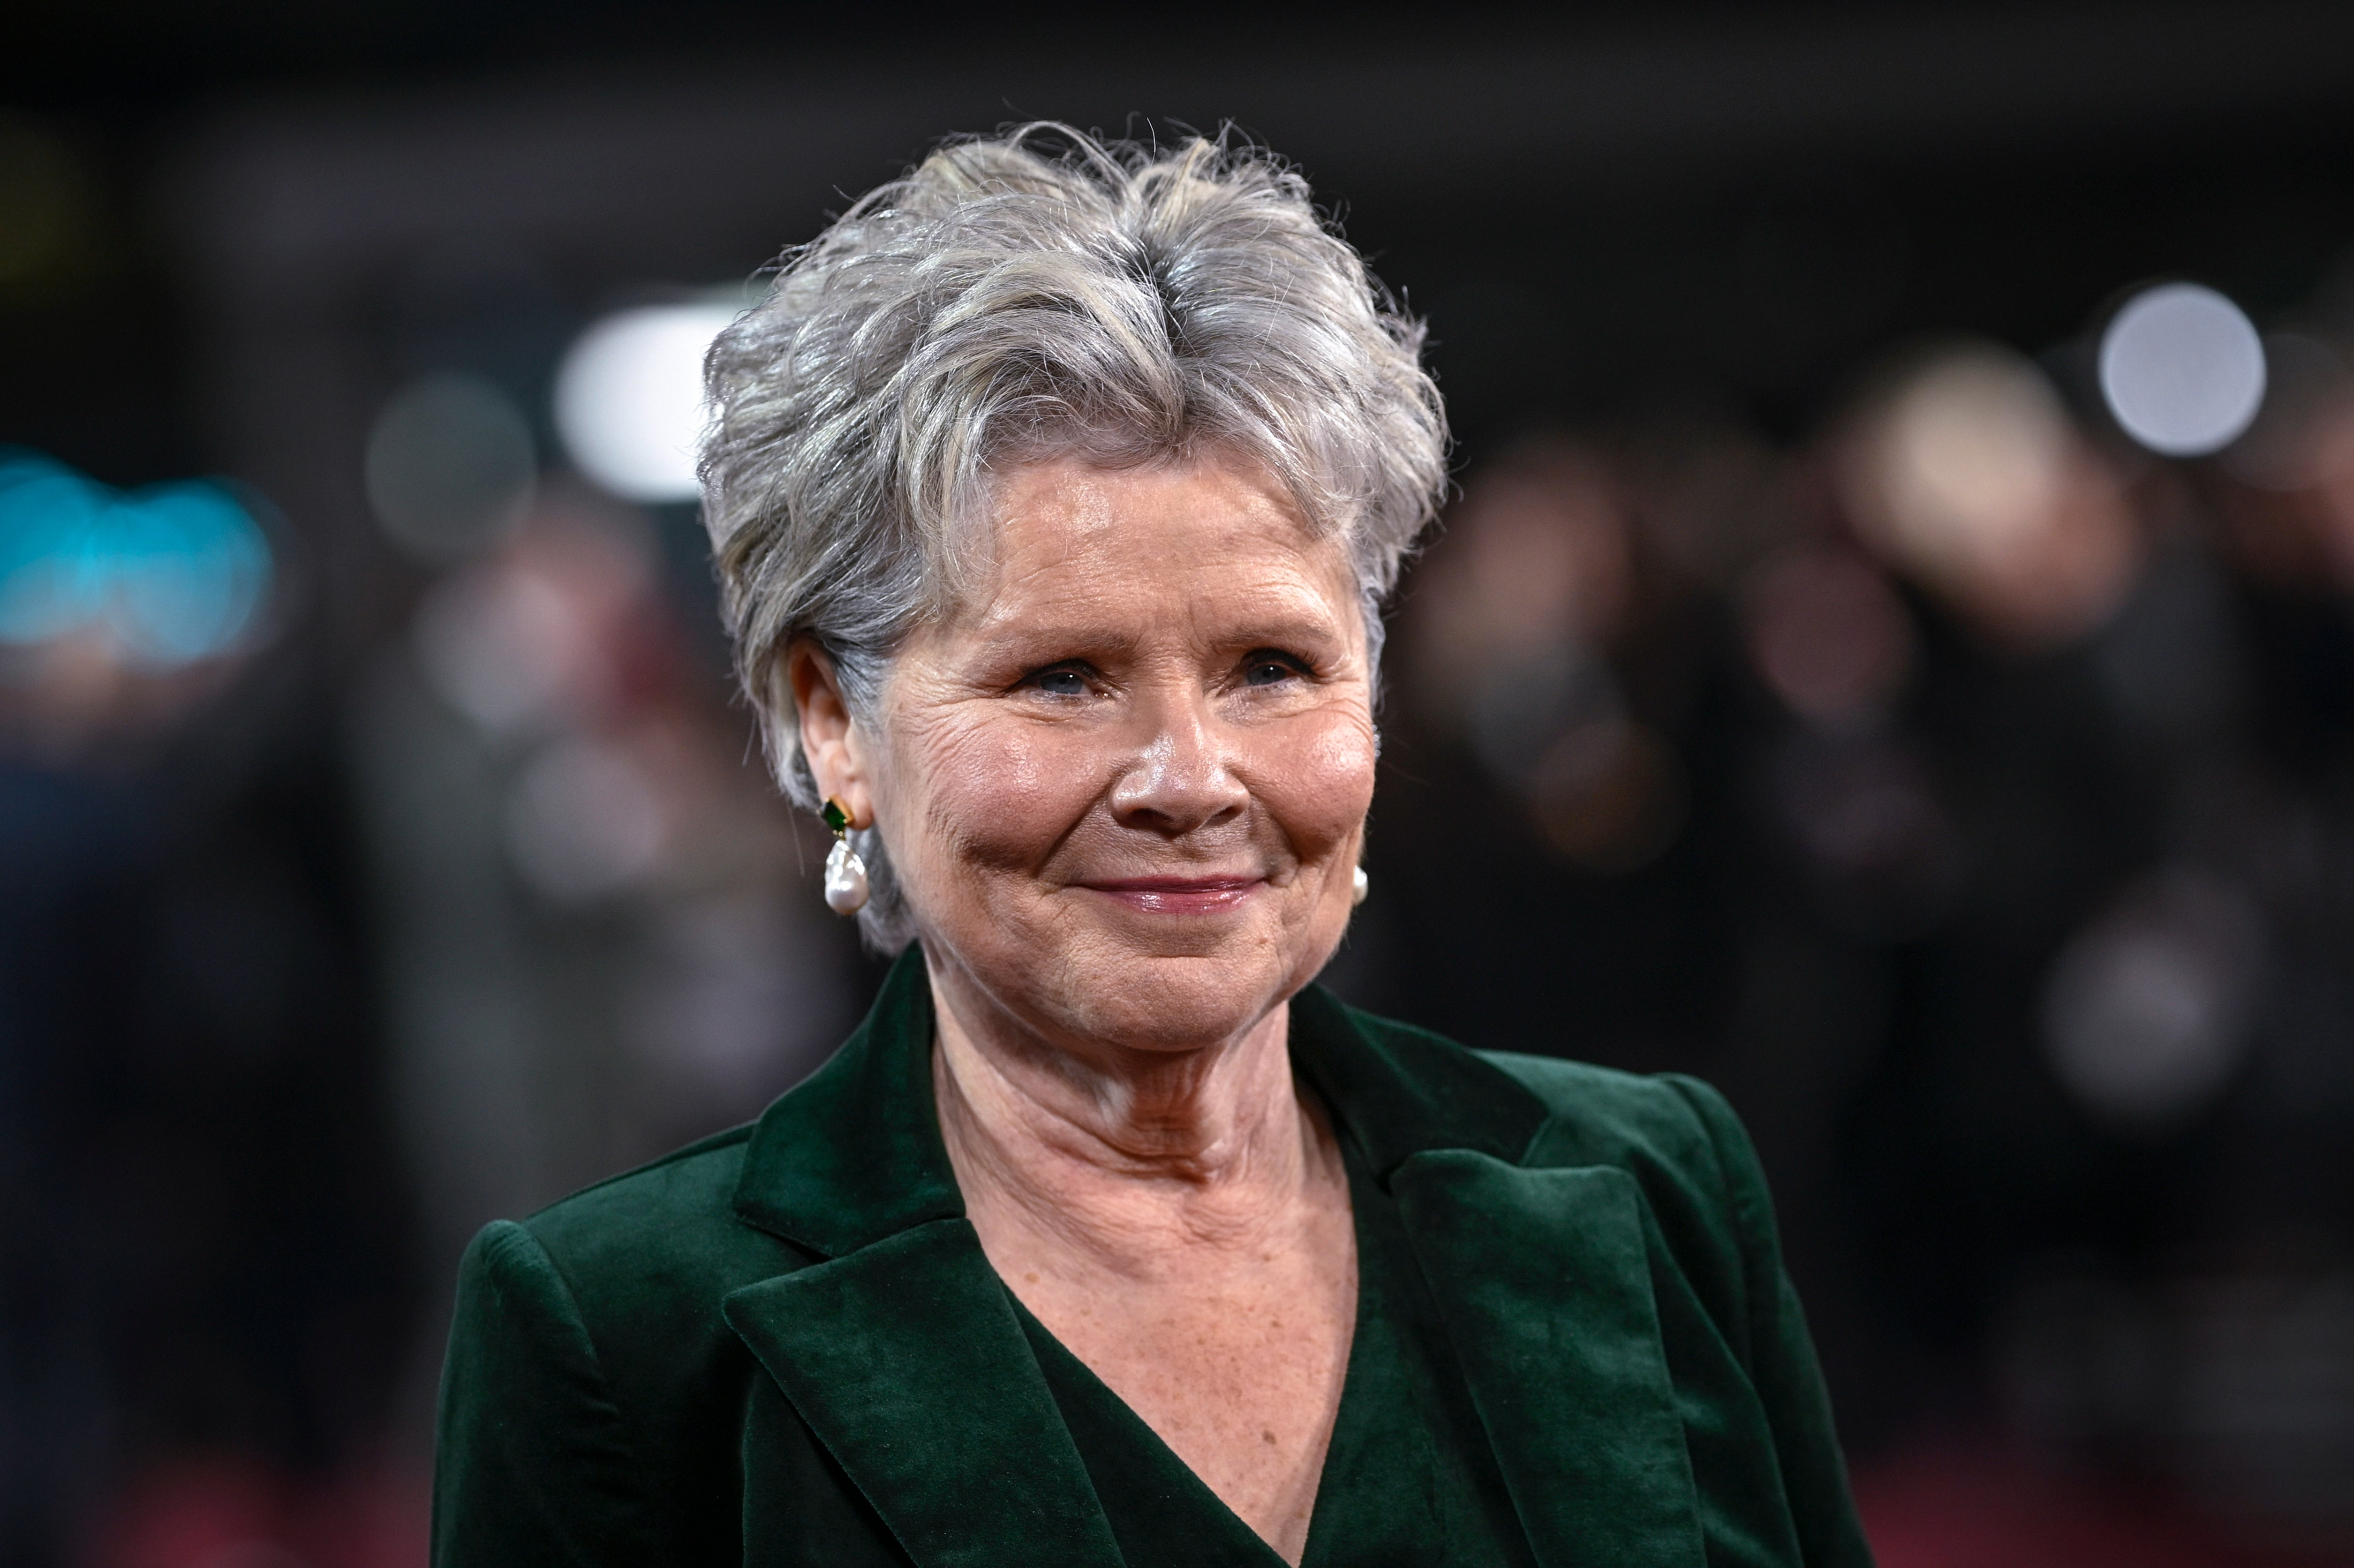 'The Crown' actress Imelda Staunton said she was 'delighted' to be made a dame for her services to theater and charity.